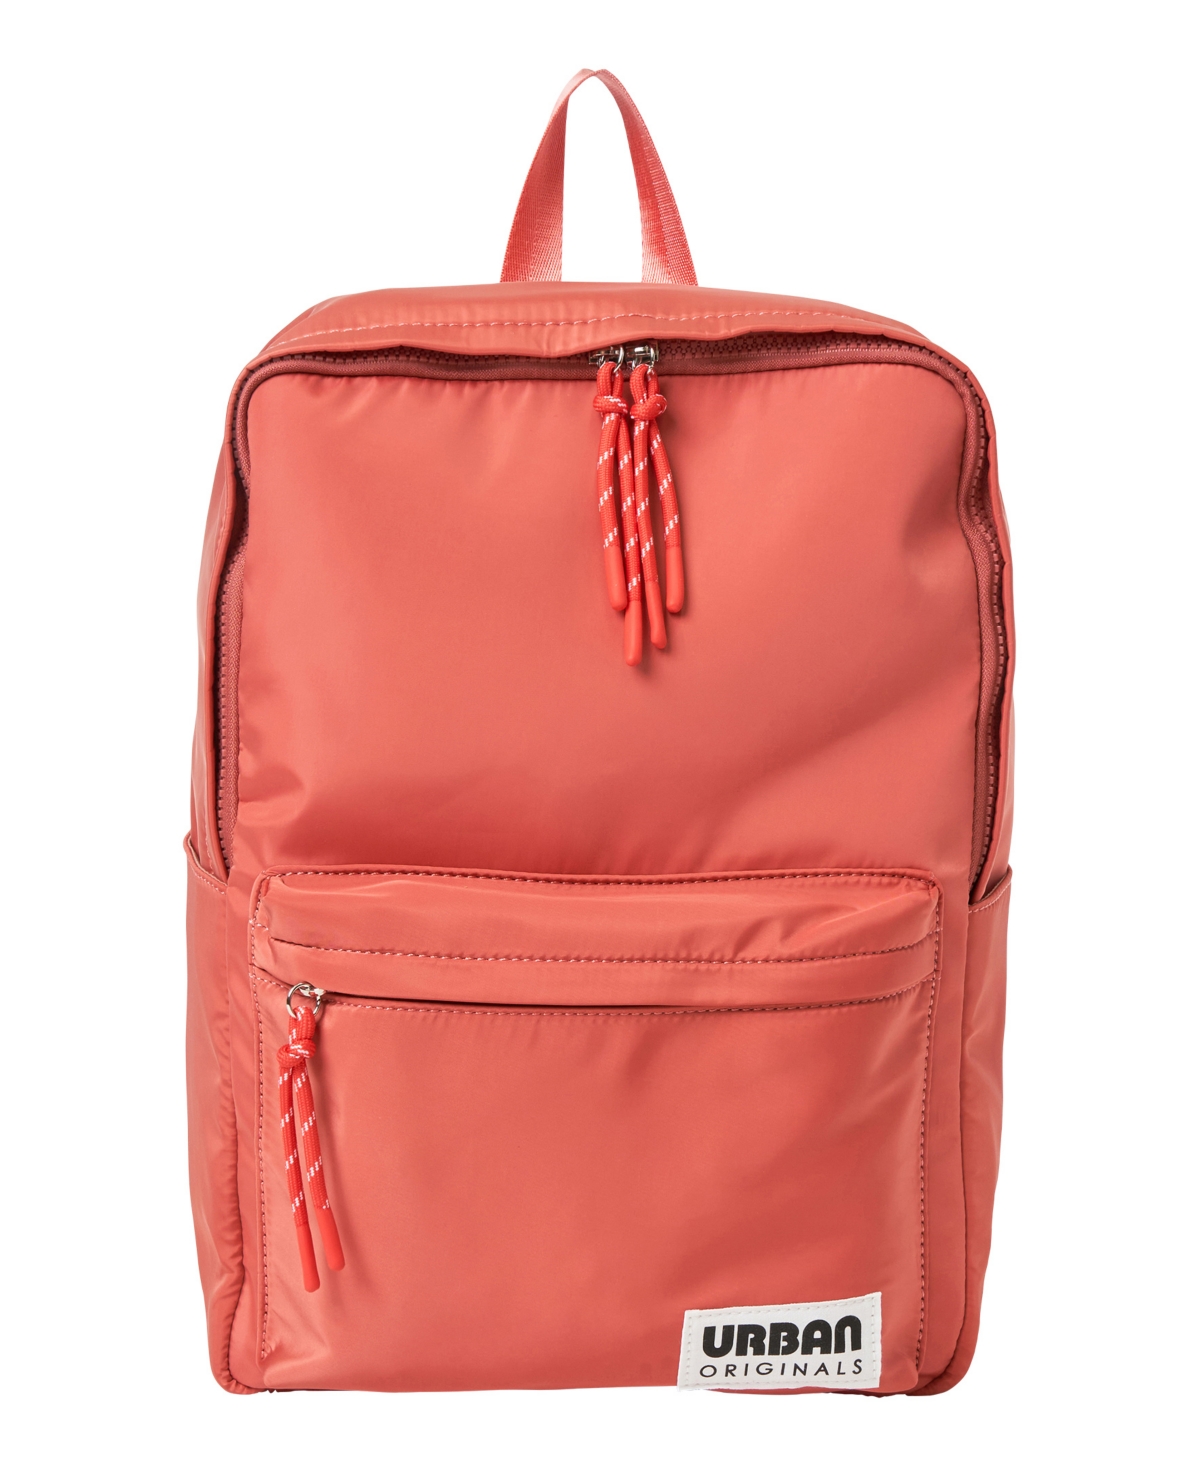 Urban Originals Poppy Small Backpack In Pink